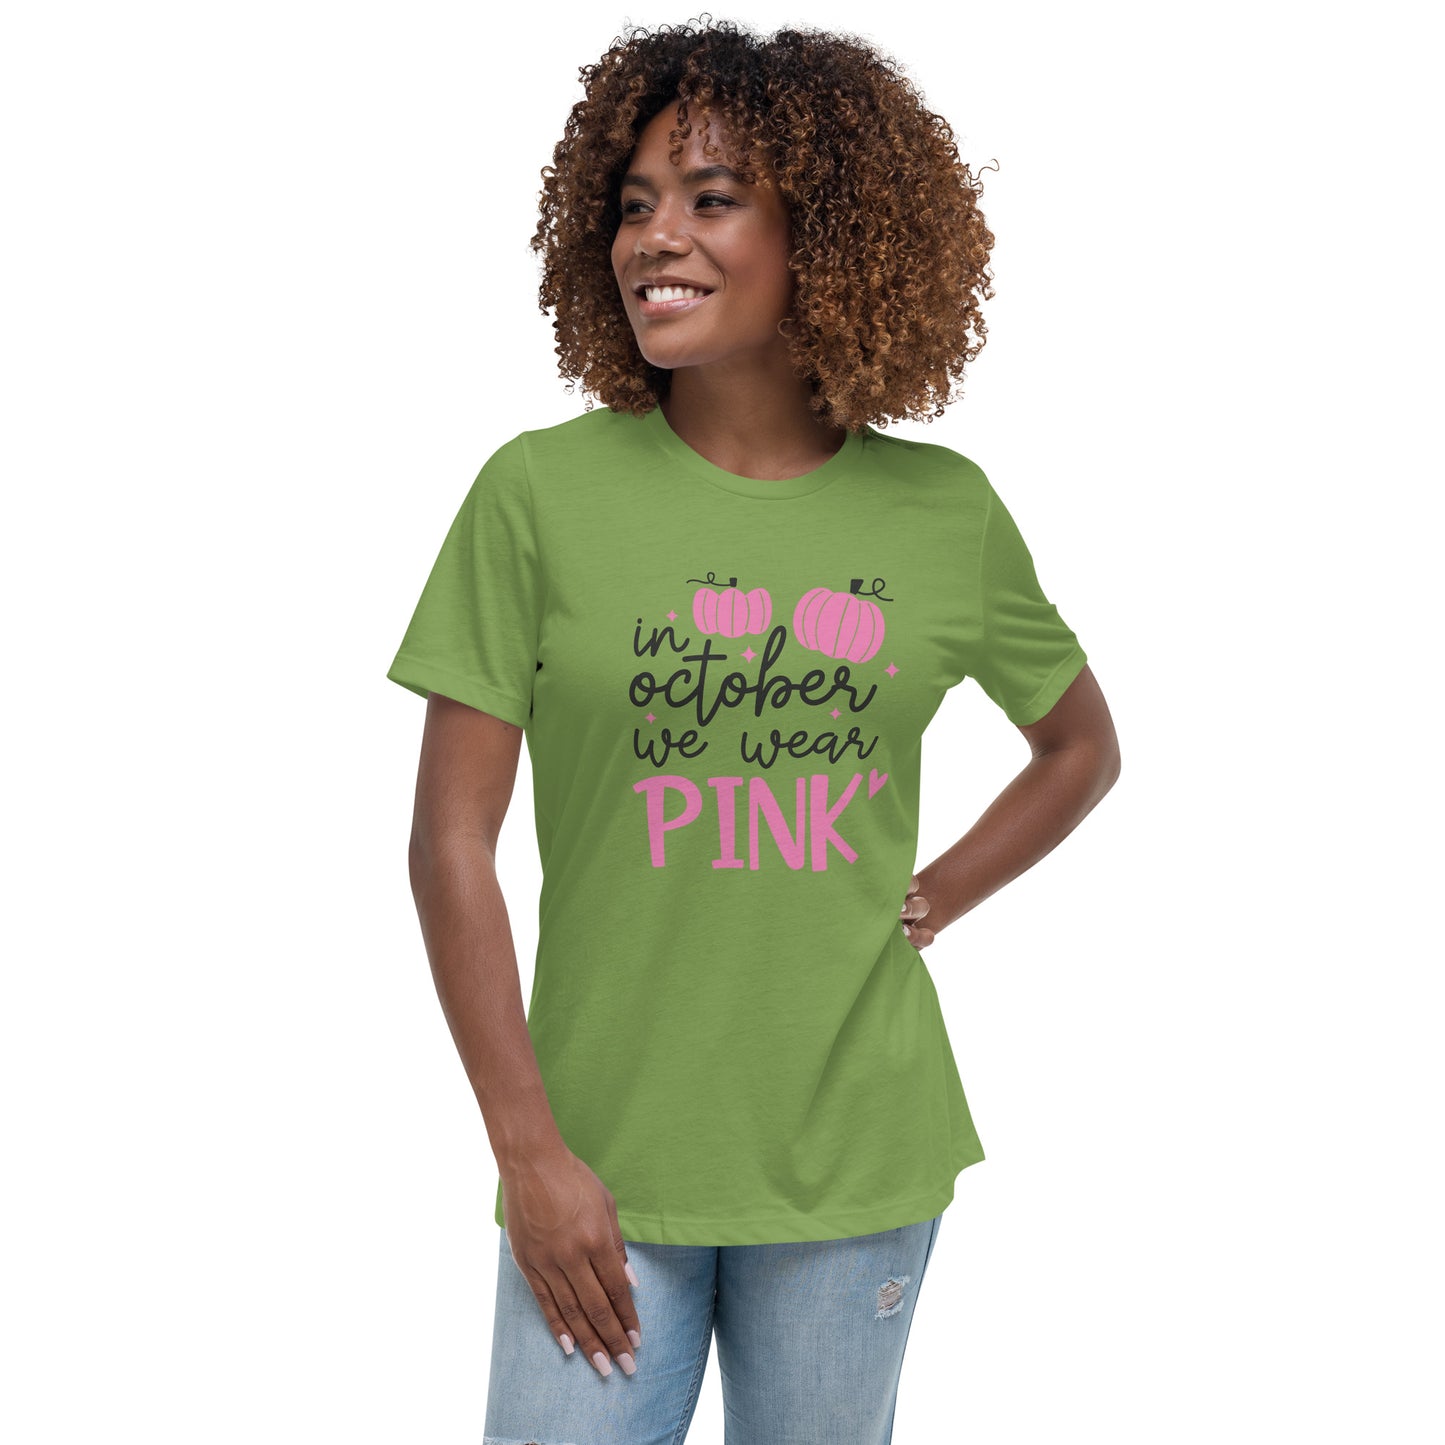 In October We Wear Pink Breast Cancer Awareness Women's Relaxed T-Shirt Tee Tshirt